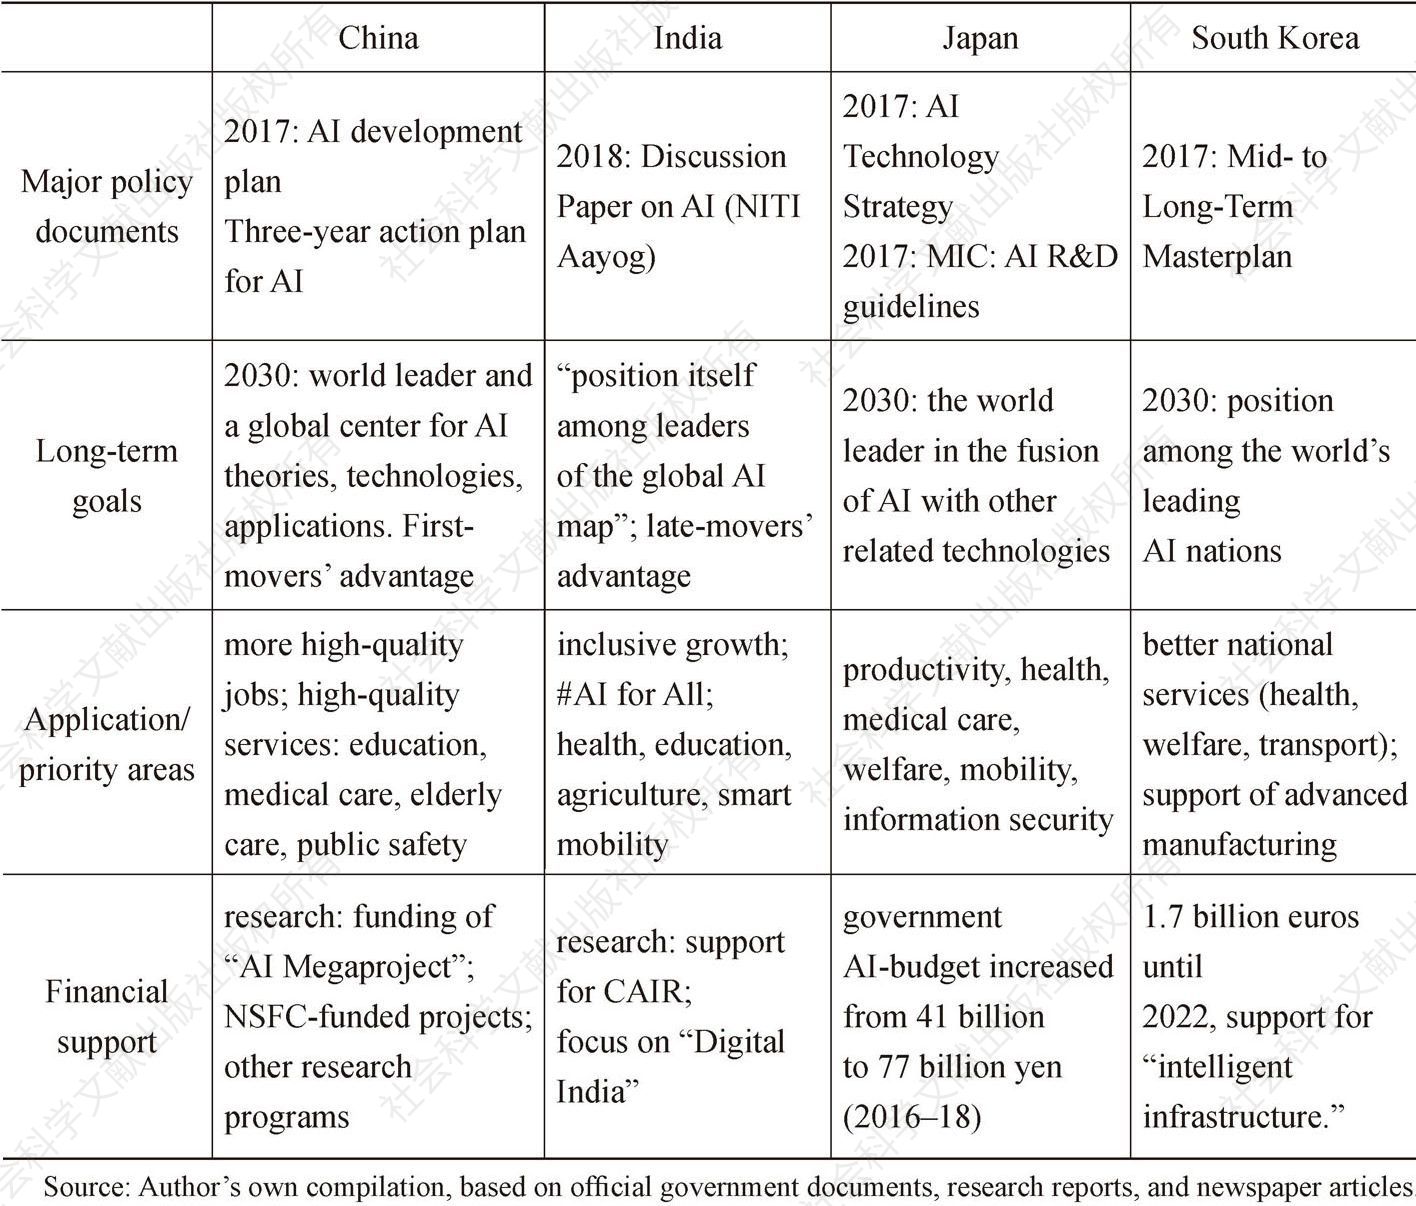 Table 1 Overview of National AI Policies’ Characteristics in China, India, Japan and South Korea